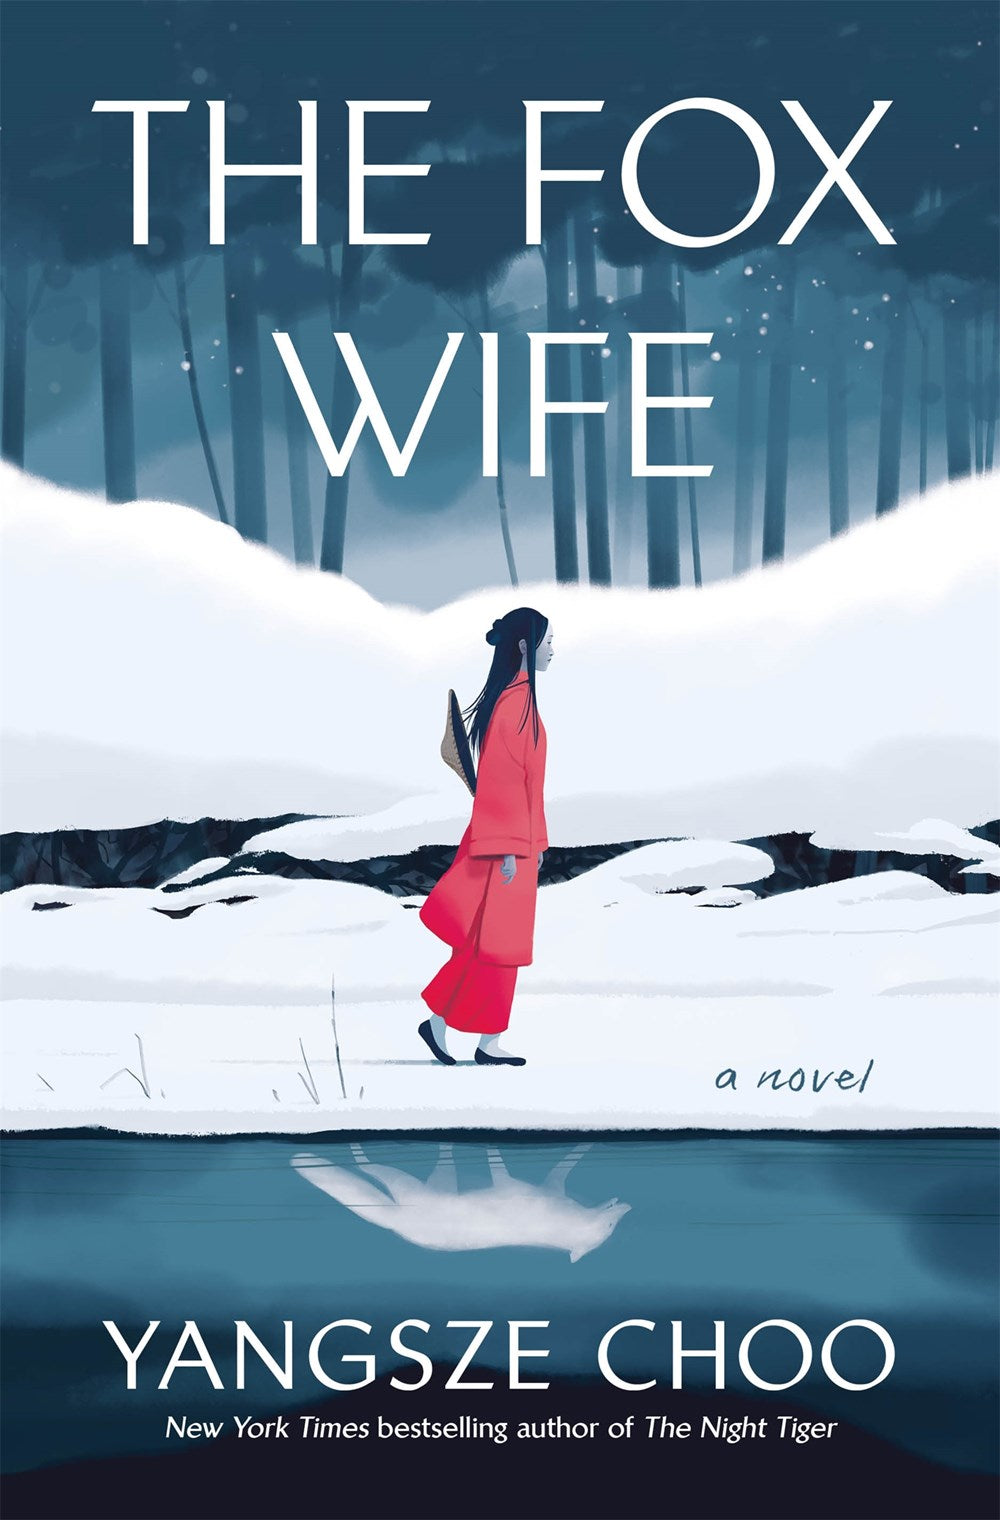 The Fox Wife by Yangsze Choo (Hardcover) (PREORDER)